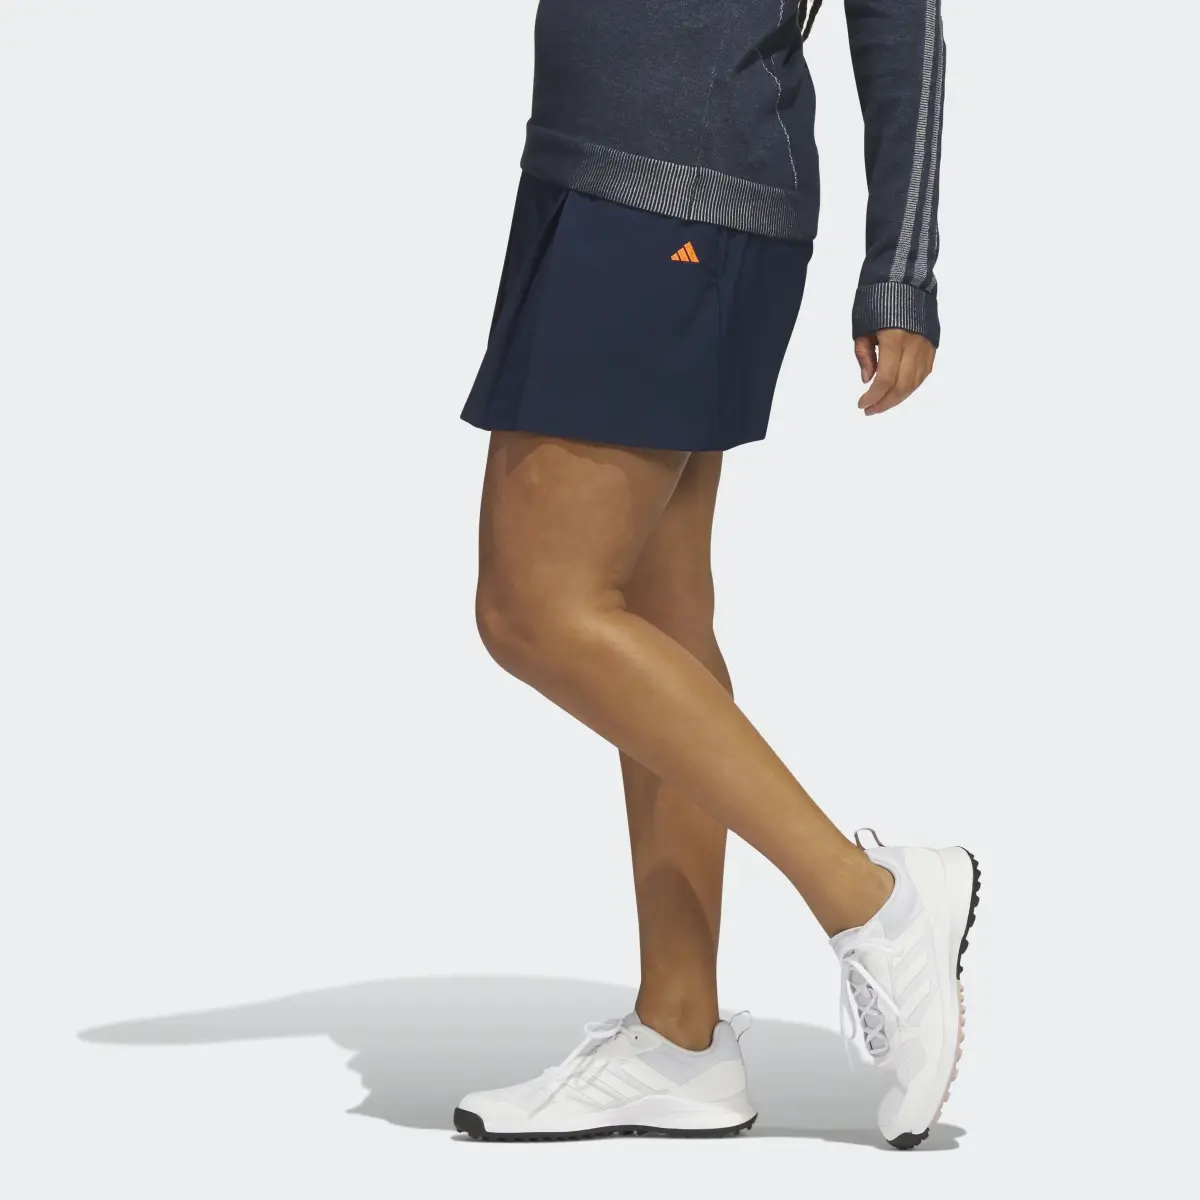 Adidas Made To Be Remade Flare Golf Skirt. 2